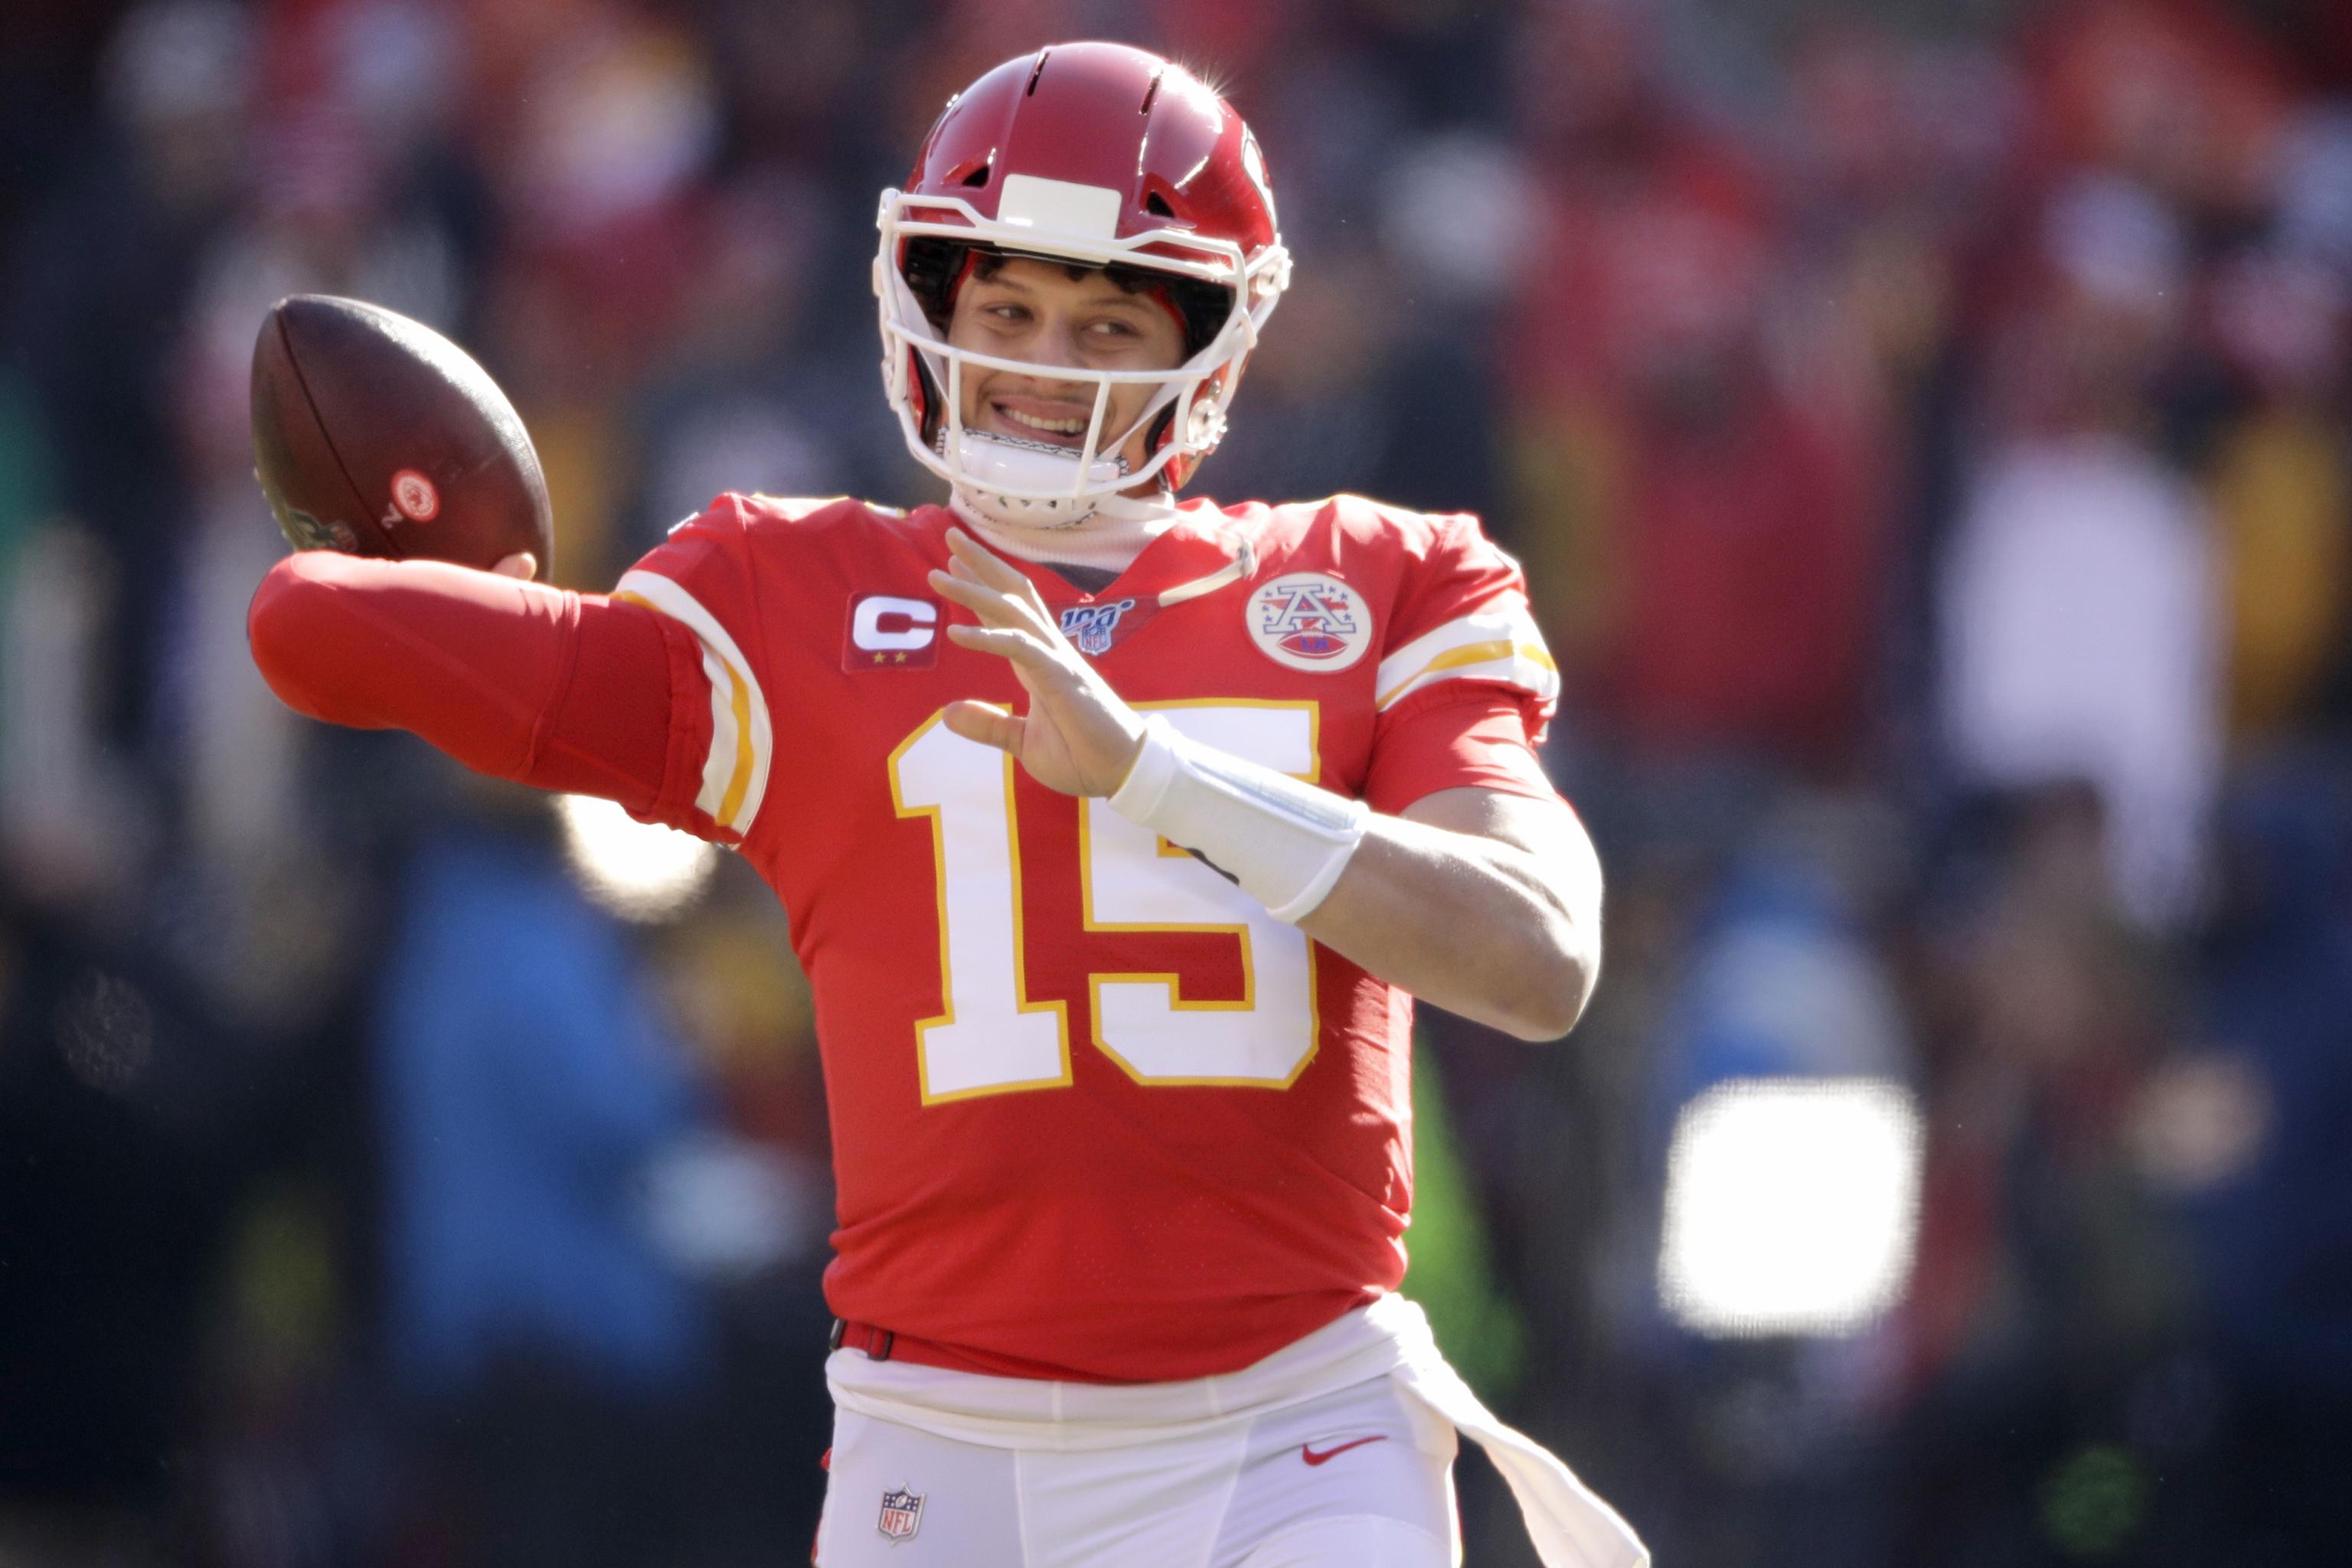 Super Bowl 2020: Watch Chiefs vs. 49ers with 4K live stream on